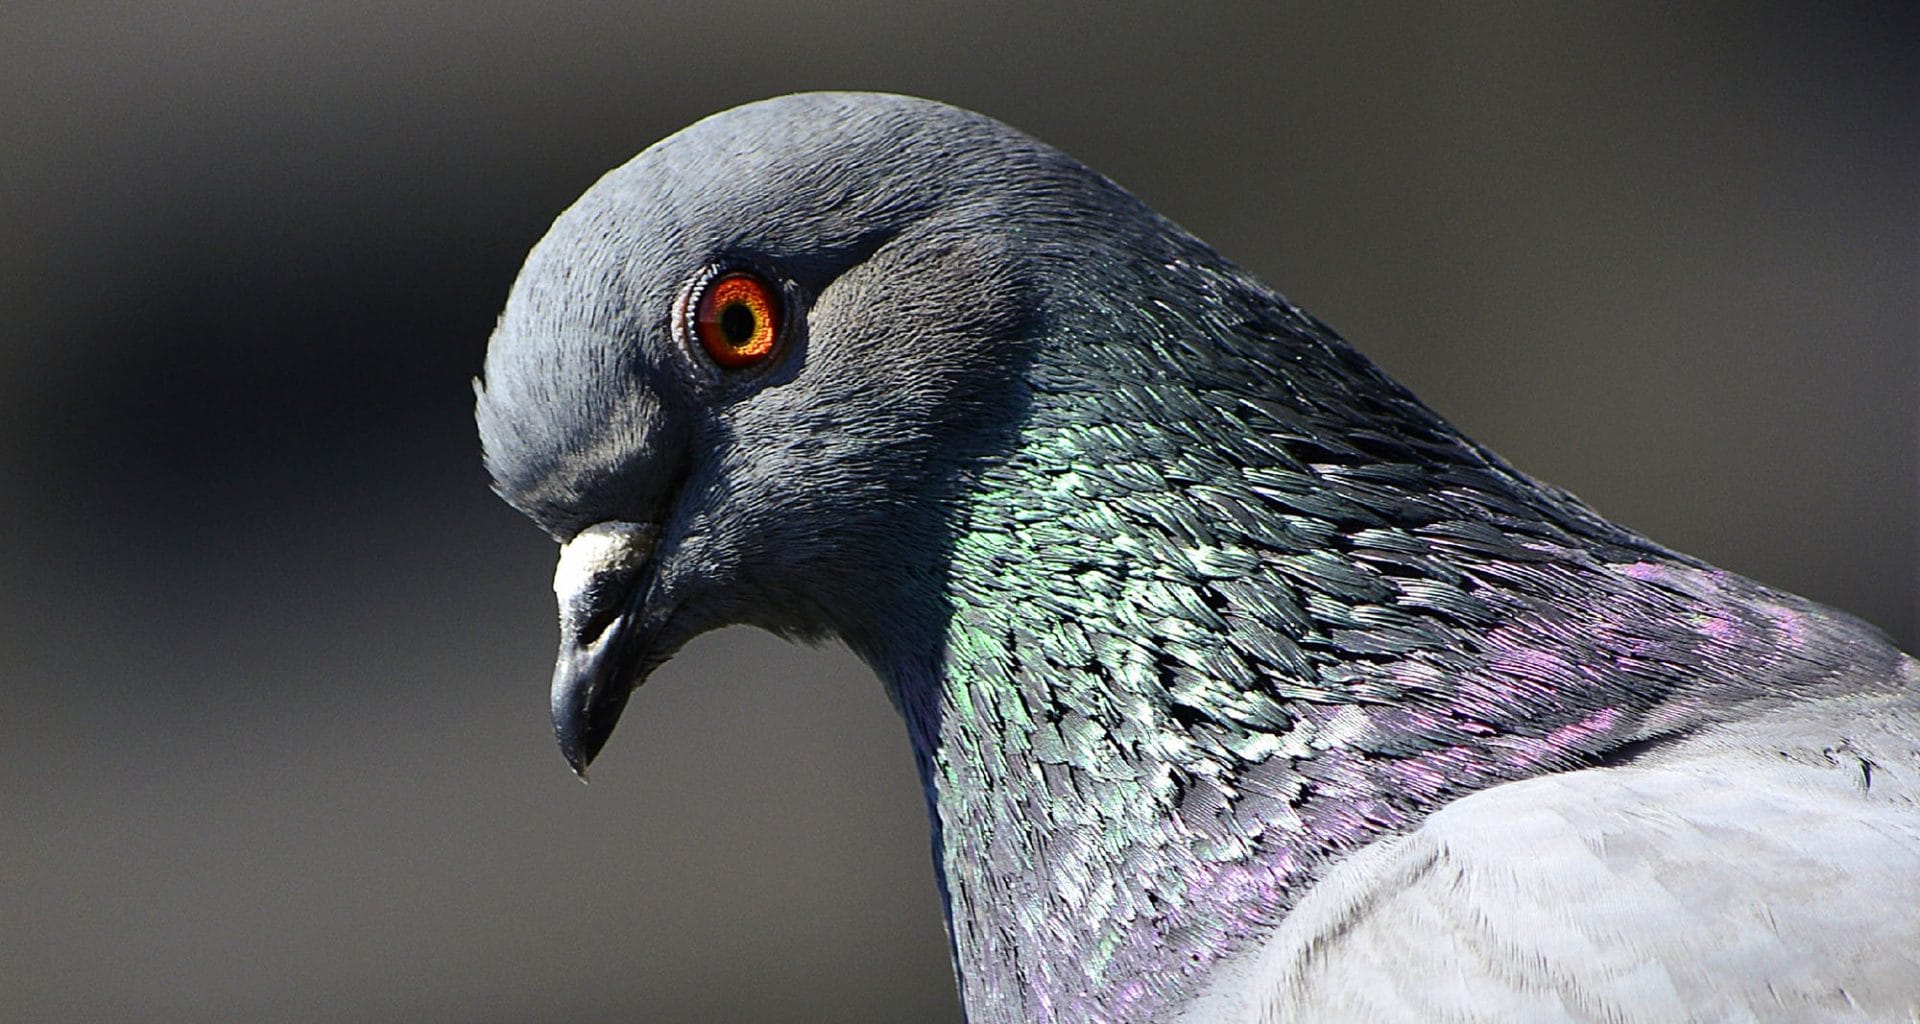 can pigeons see at night